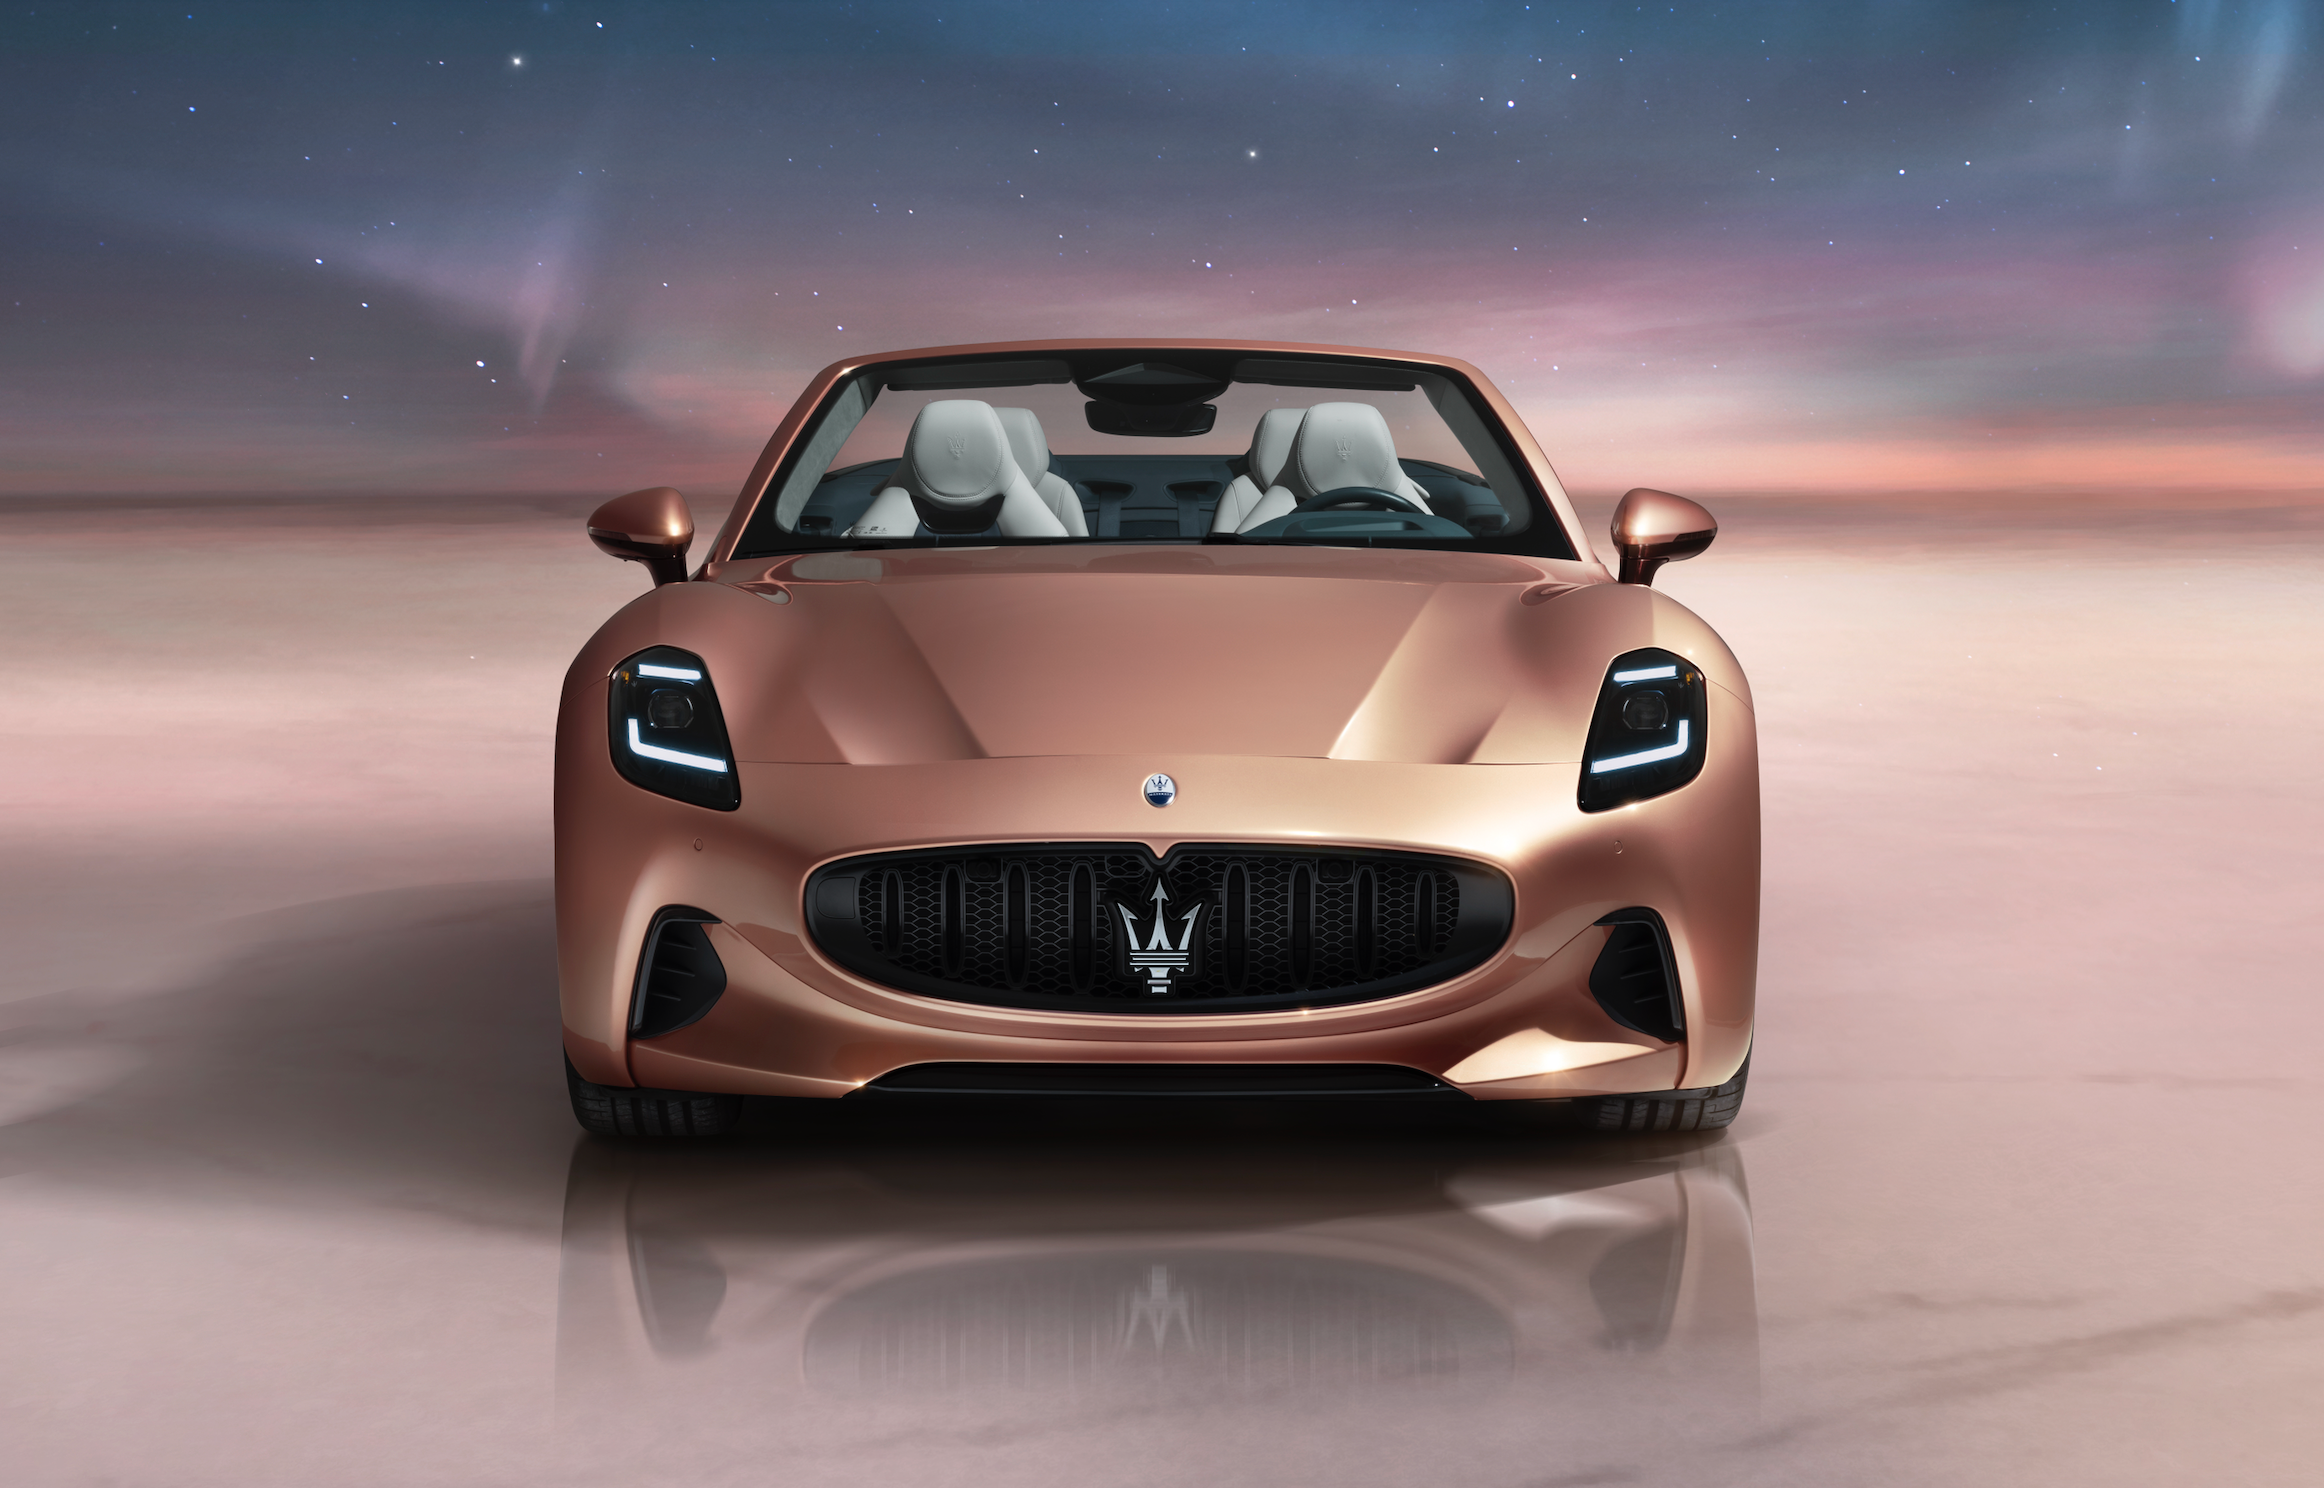 The Maserati GranCabrio Folgore roams around the rarefied end of the car market and Maserati have no wish other than to keep their cars rare and seldom glimpsed